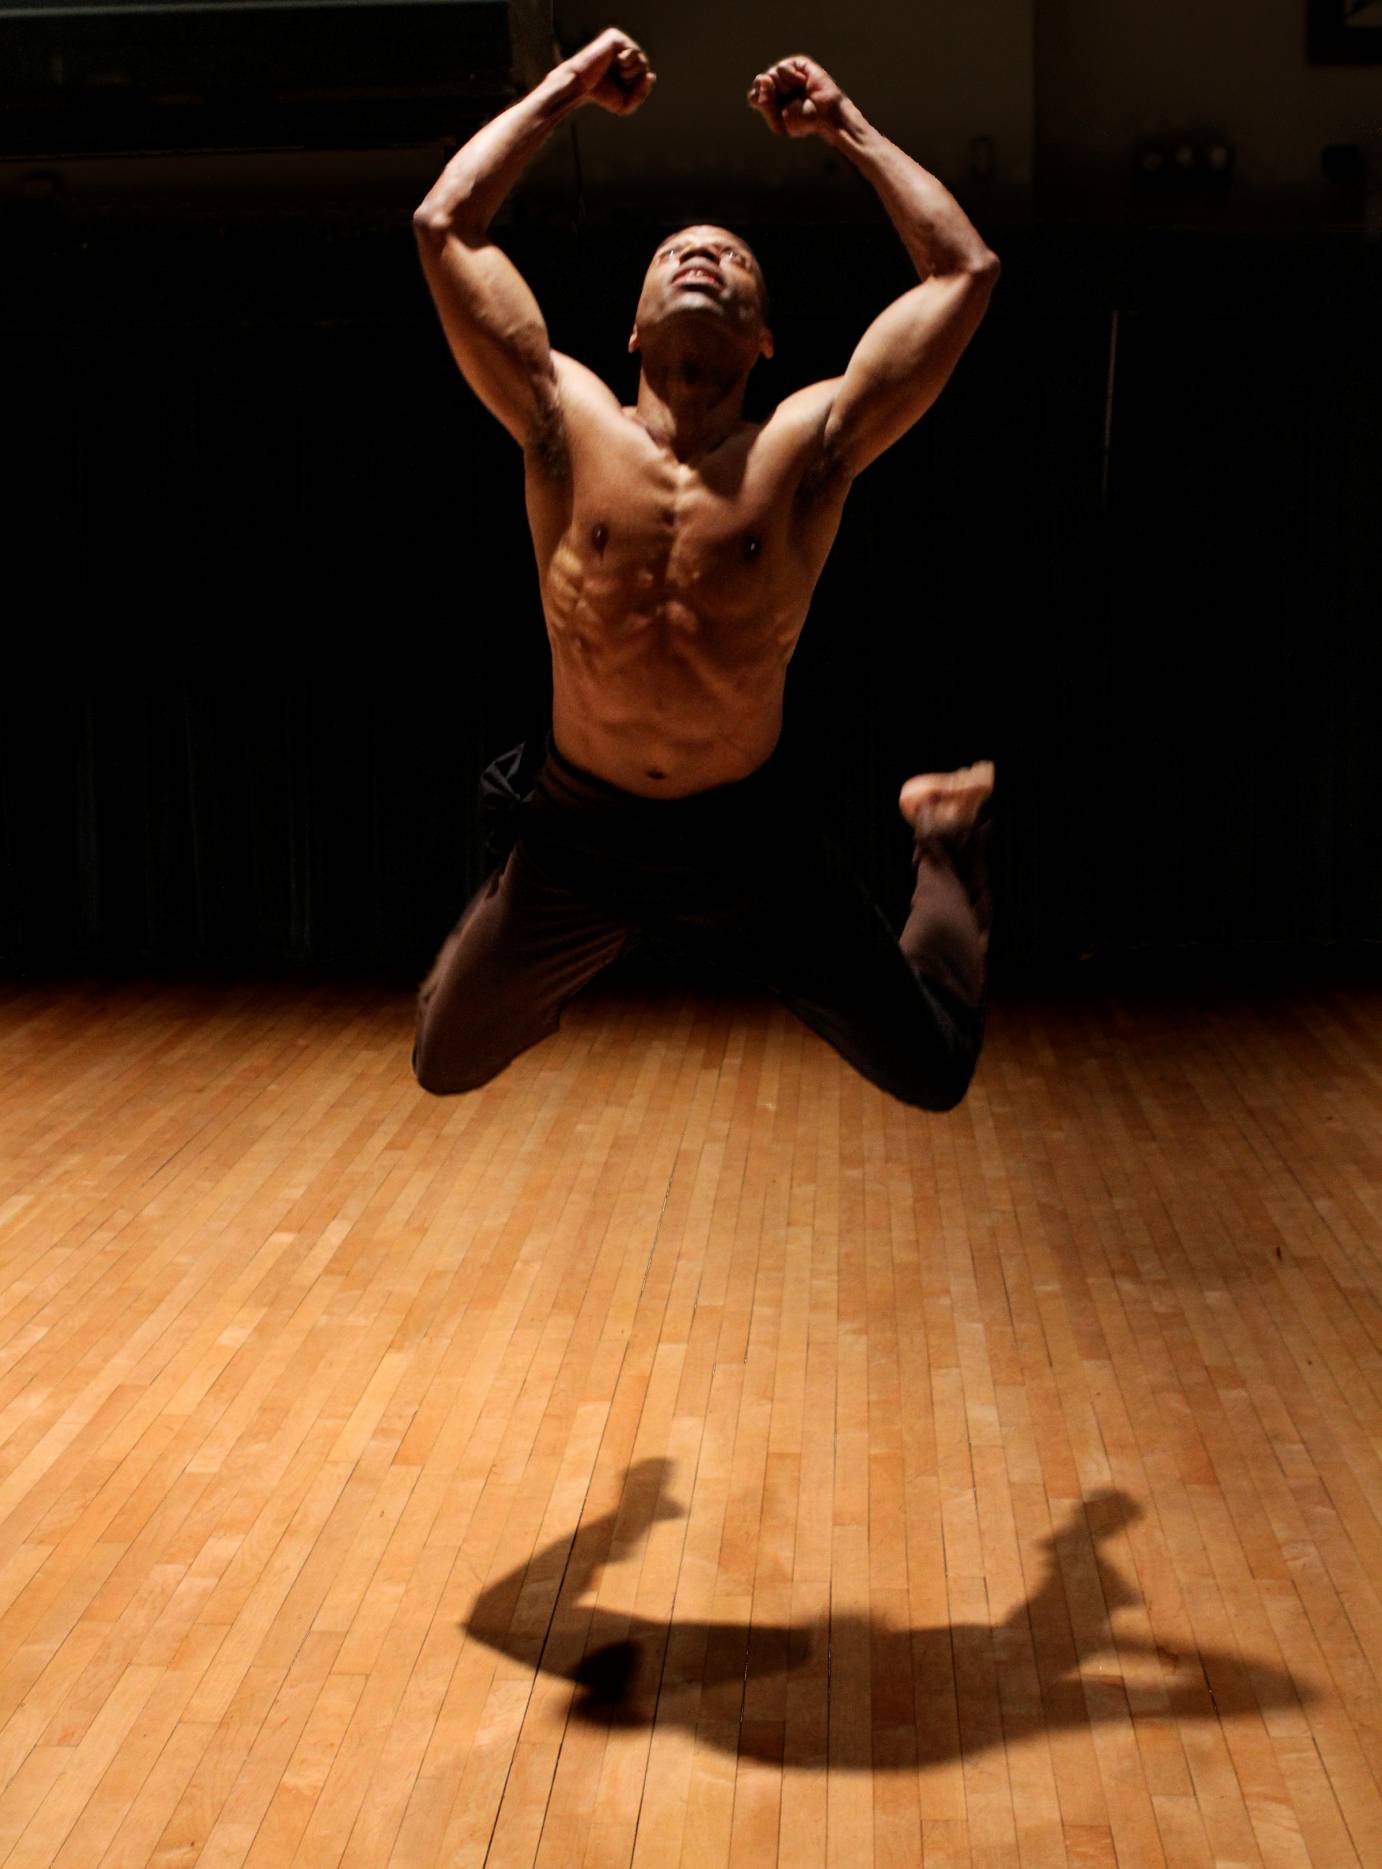 Paul Anthony Dennis, who is topless with black pants, leaps and is completely suspended in the air, his knees bent at an angle.